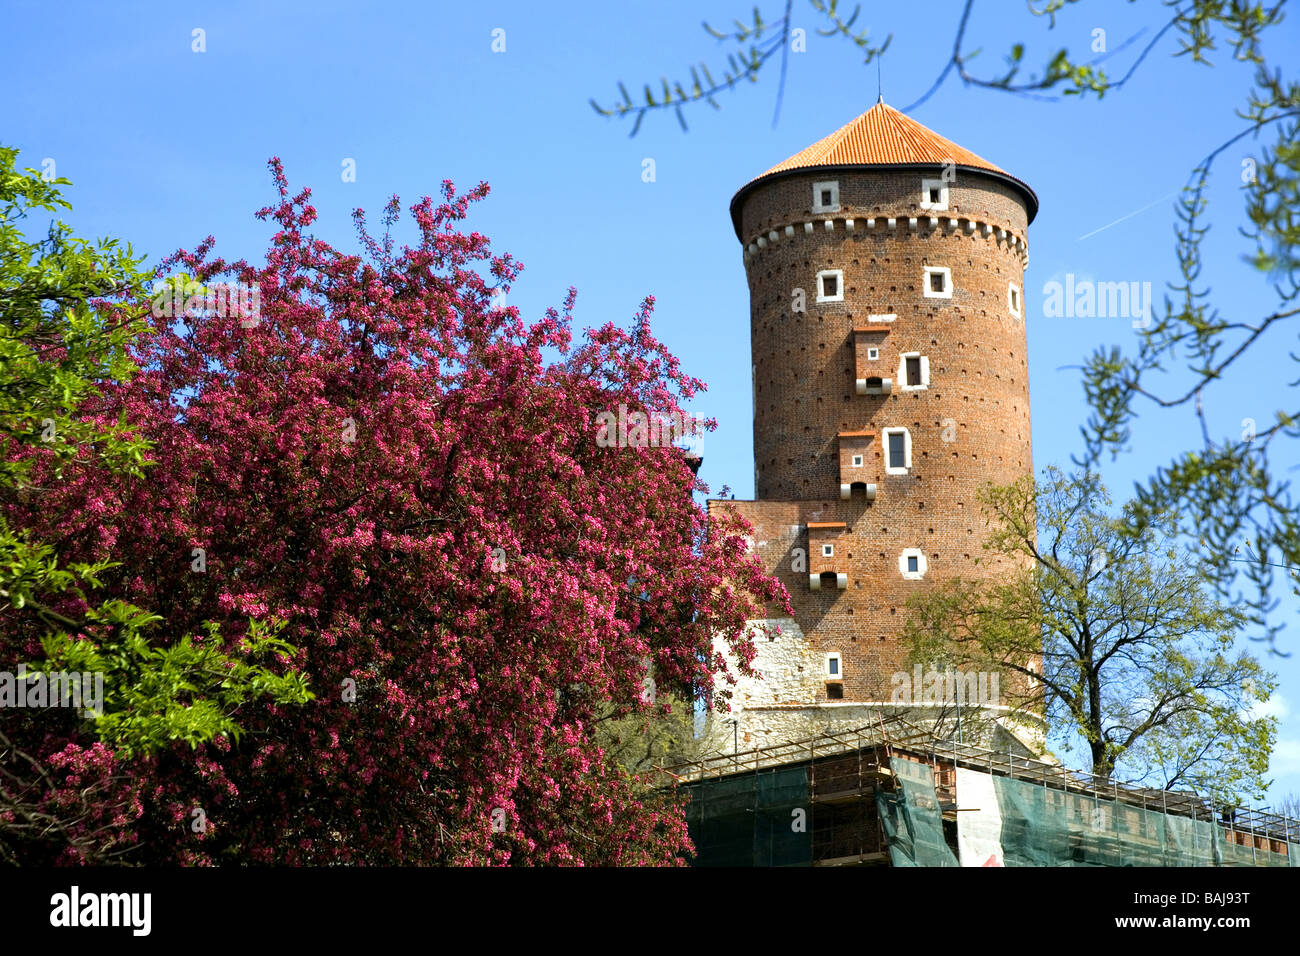 Wawel Castle in Cracow Poland Stock Photo